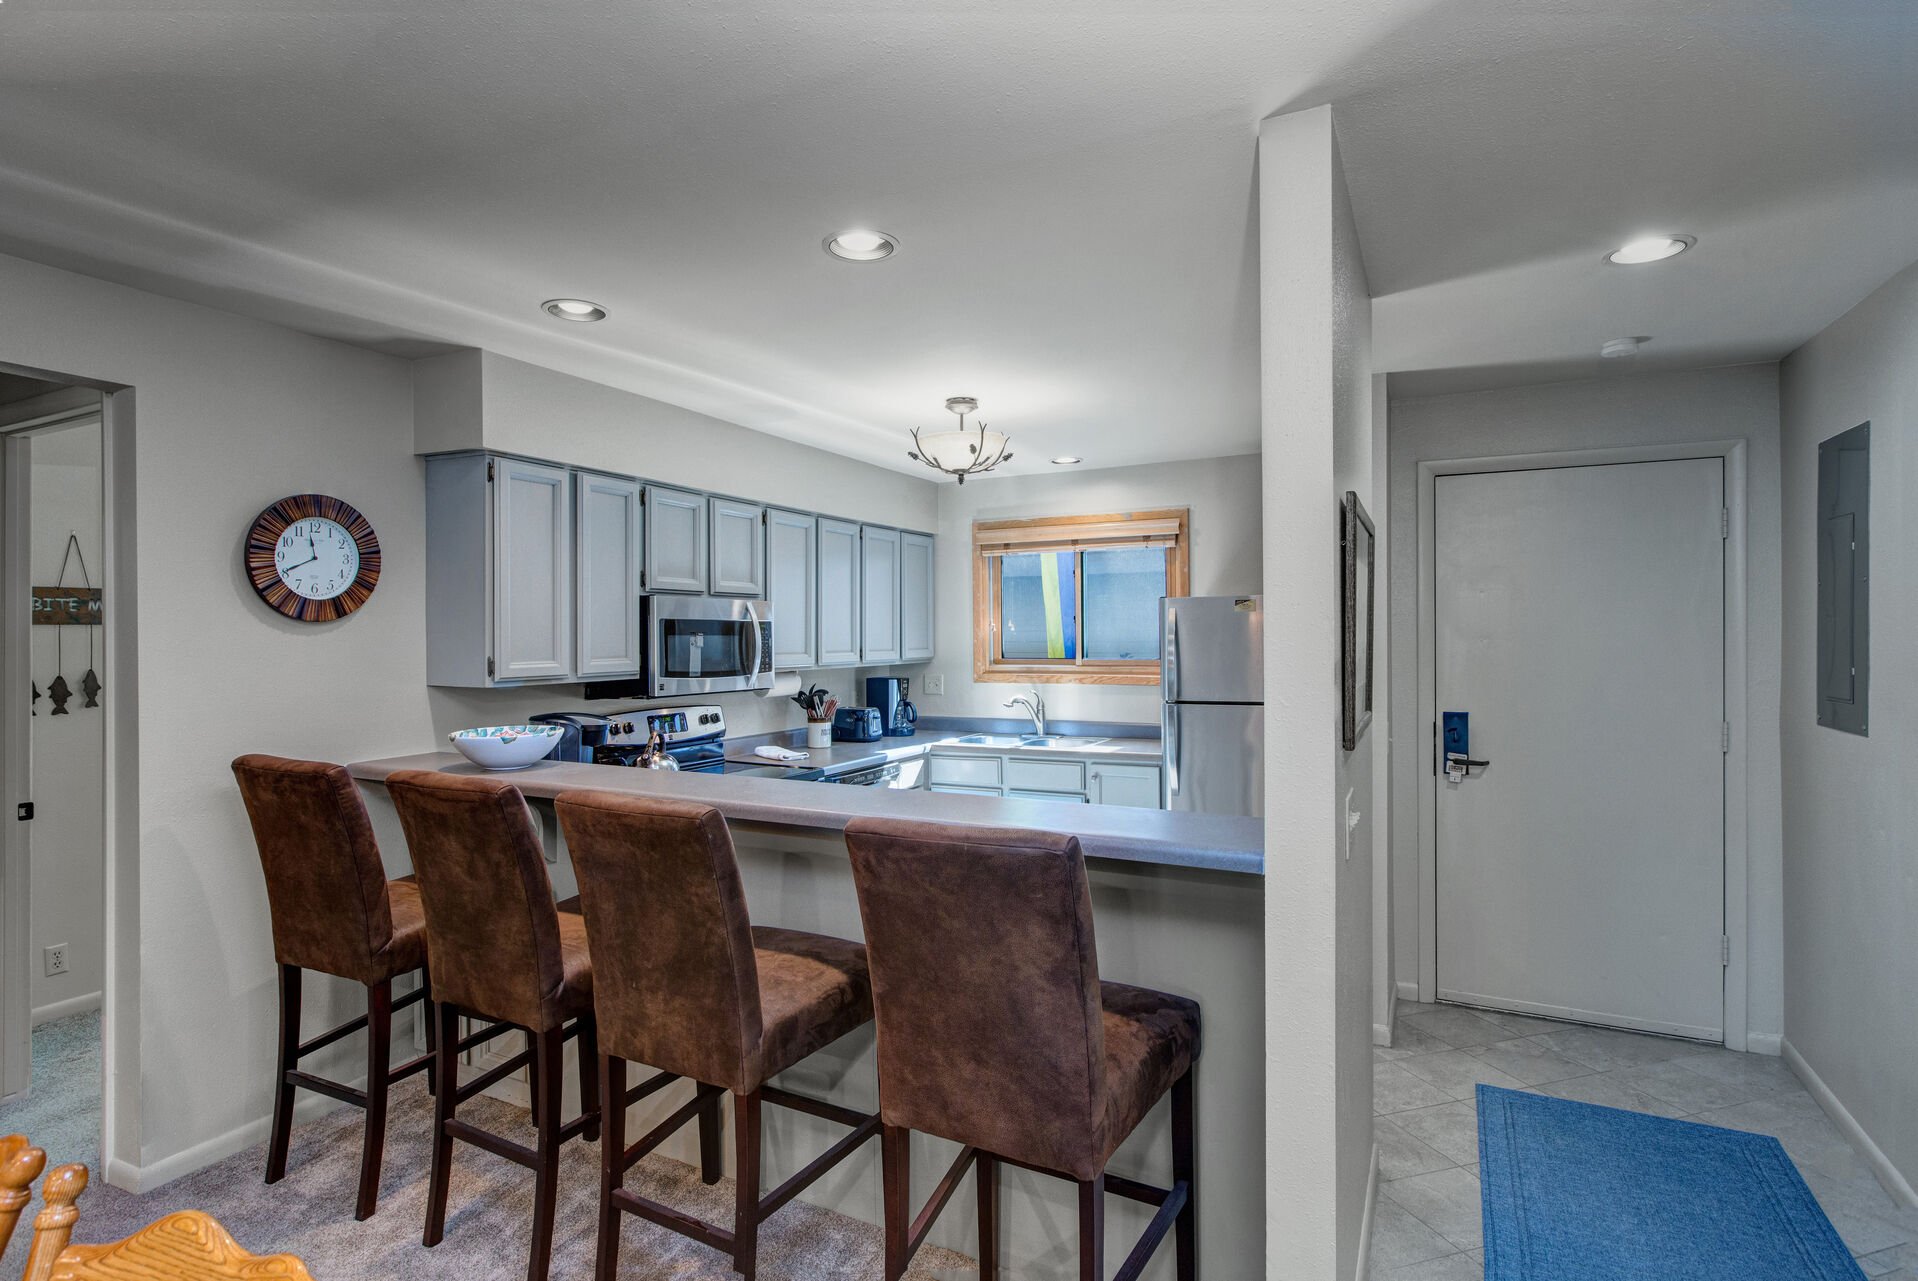 Fully Equipped Kitchen with Stainless Steel Kenmore Appliances, and Convenient Bar Seating for Four